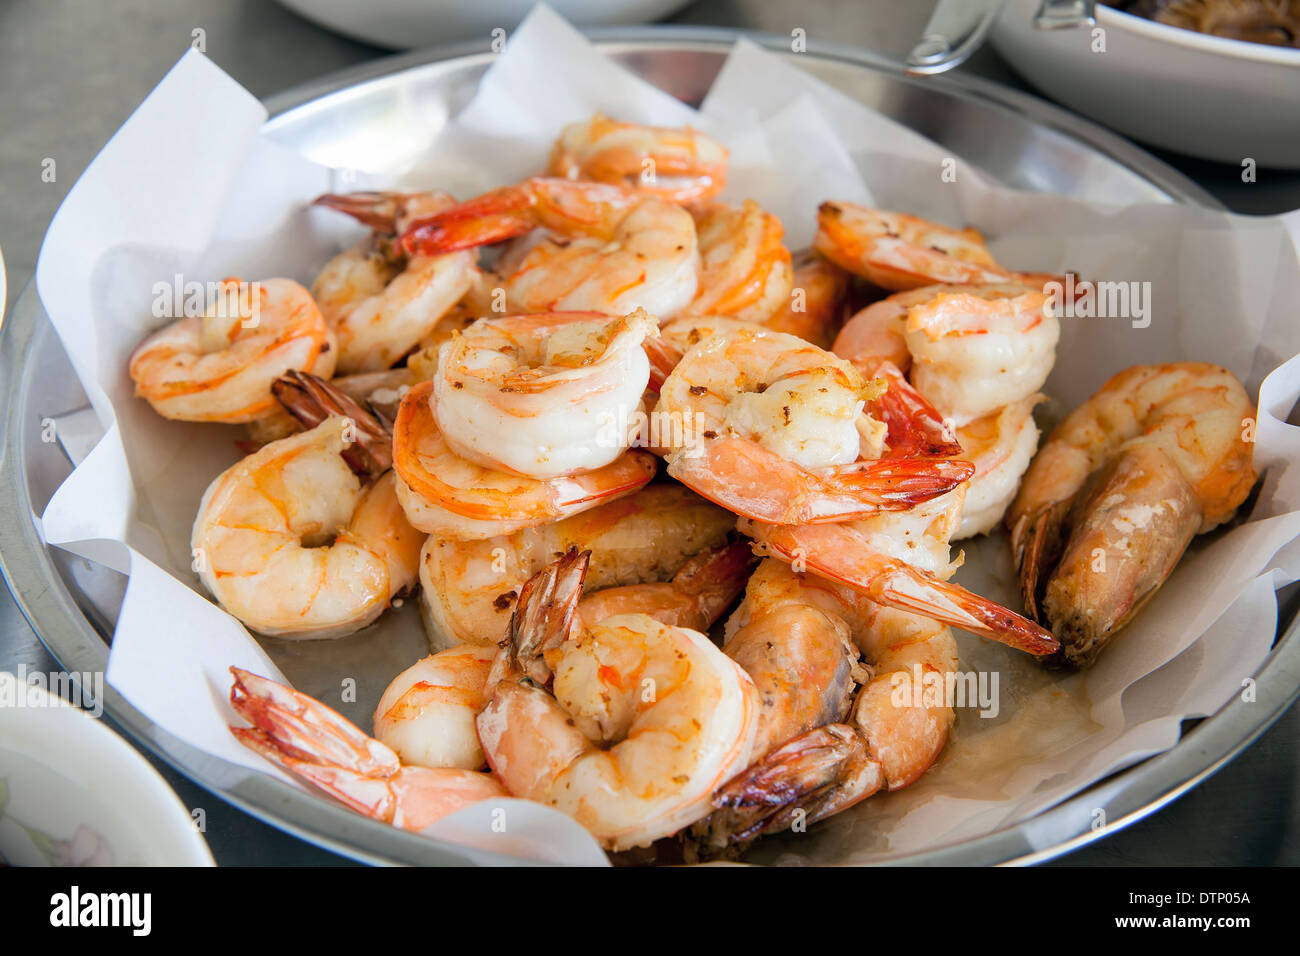 Cooked Prawns as Ingredients for Chinese New Year Big Bowl Feast Dish Stock Photo